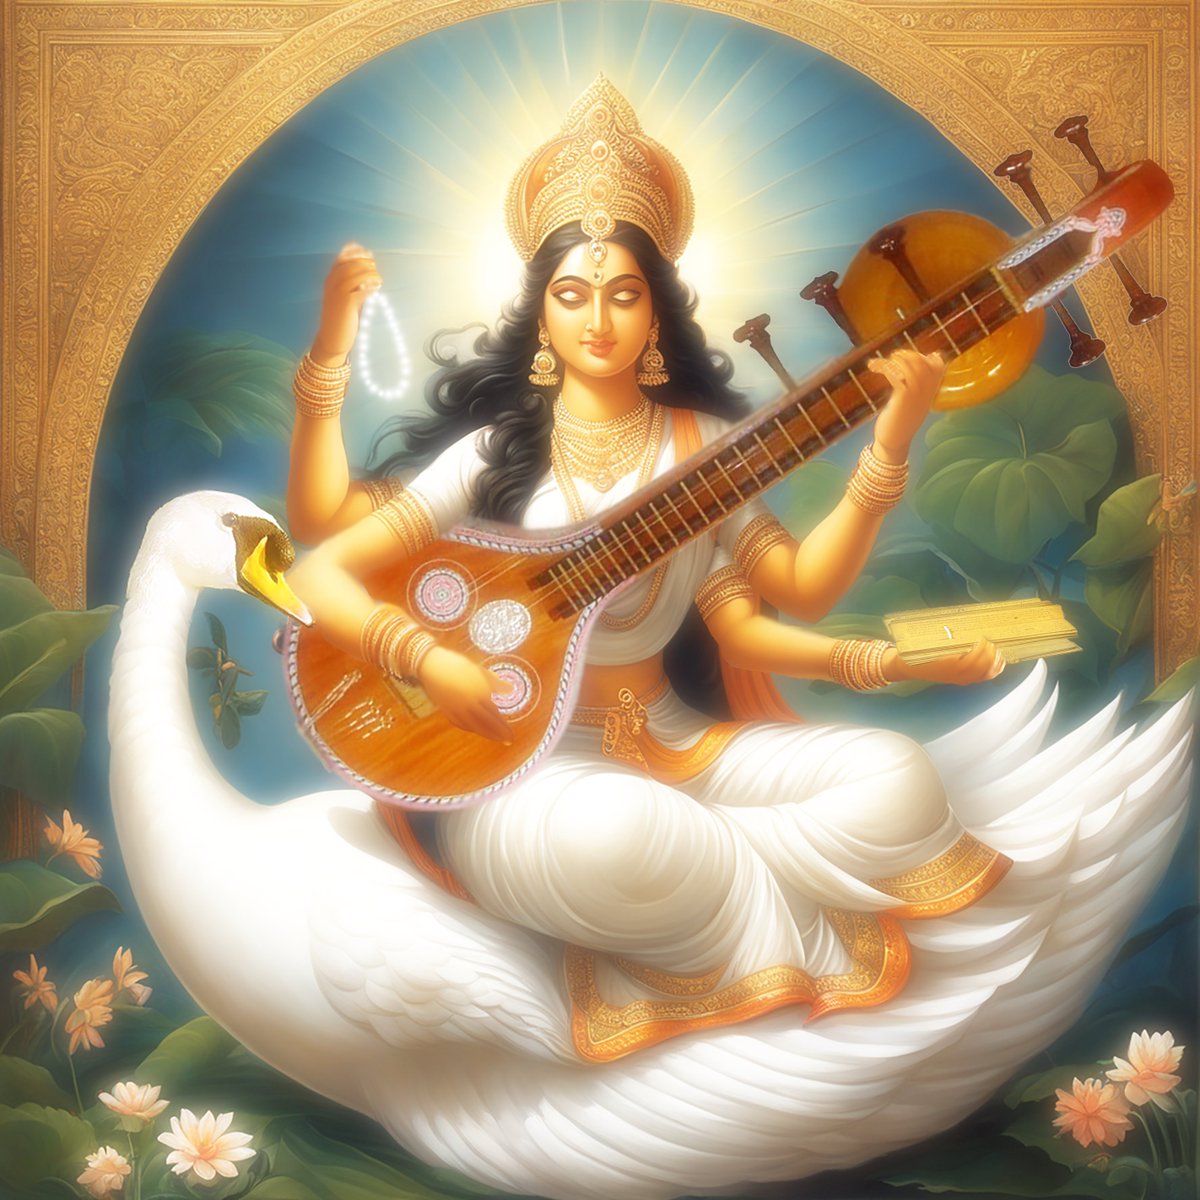 Image of Saraswati, the Indian goddess of knowledge and wisdom, depicted as a white-clad woman with four arms
#saraswati #goddesssaraswati #hindugoddess #knowledge #wisdom #learning #music #art #creativity #enlightenment #lotus #veena #book #rosary #waterpot #swan